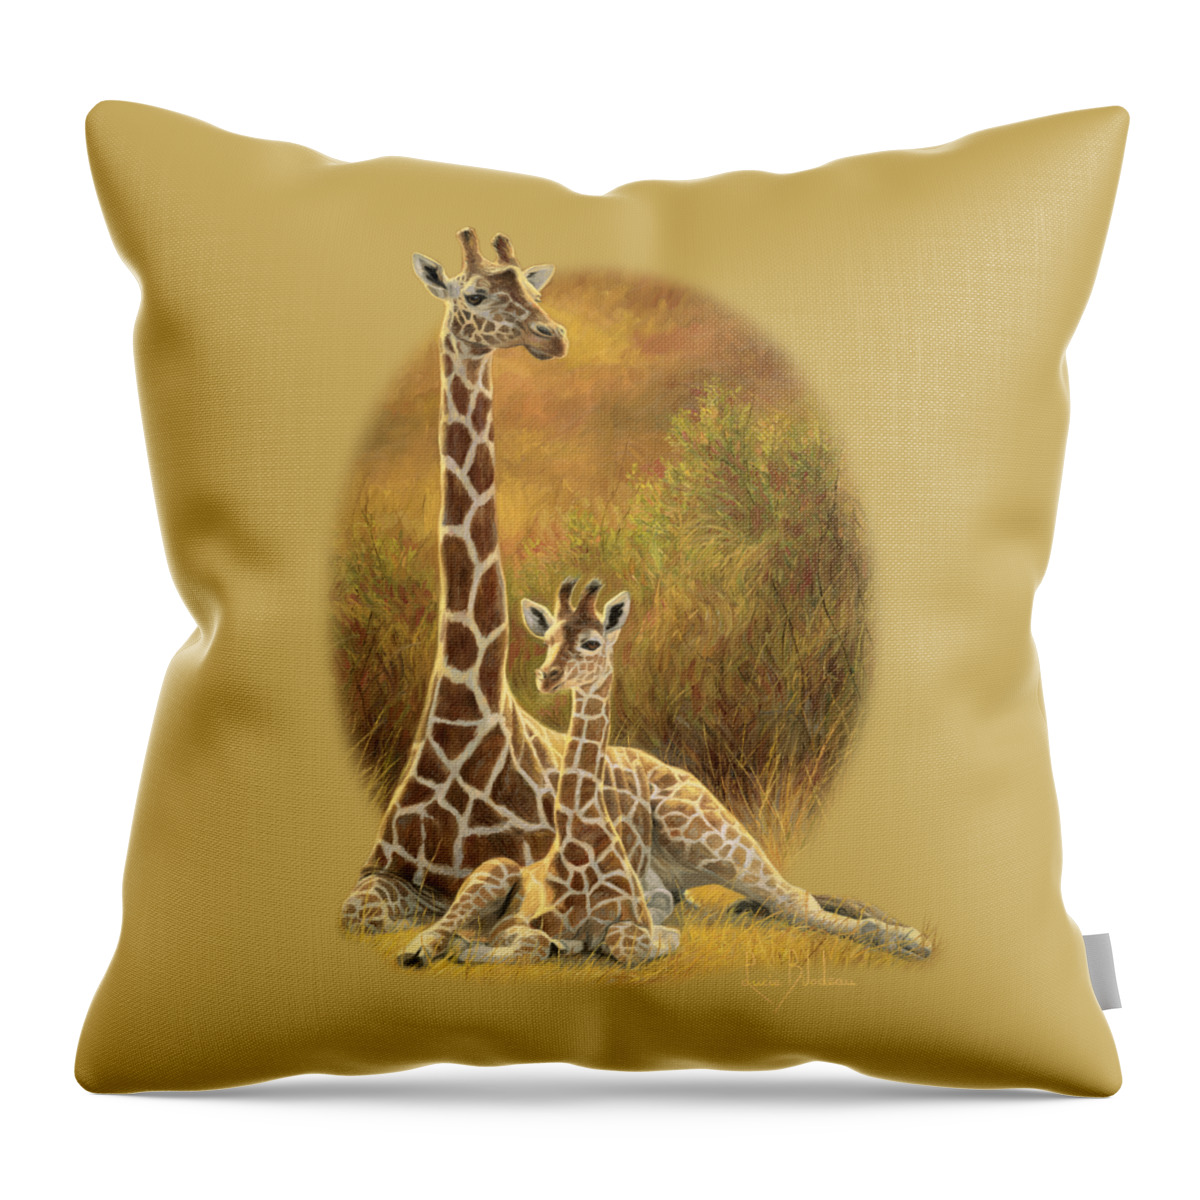 Giraffe Throw Pillow featuring the painting Mother and Son by Lucie Bilodeau